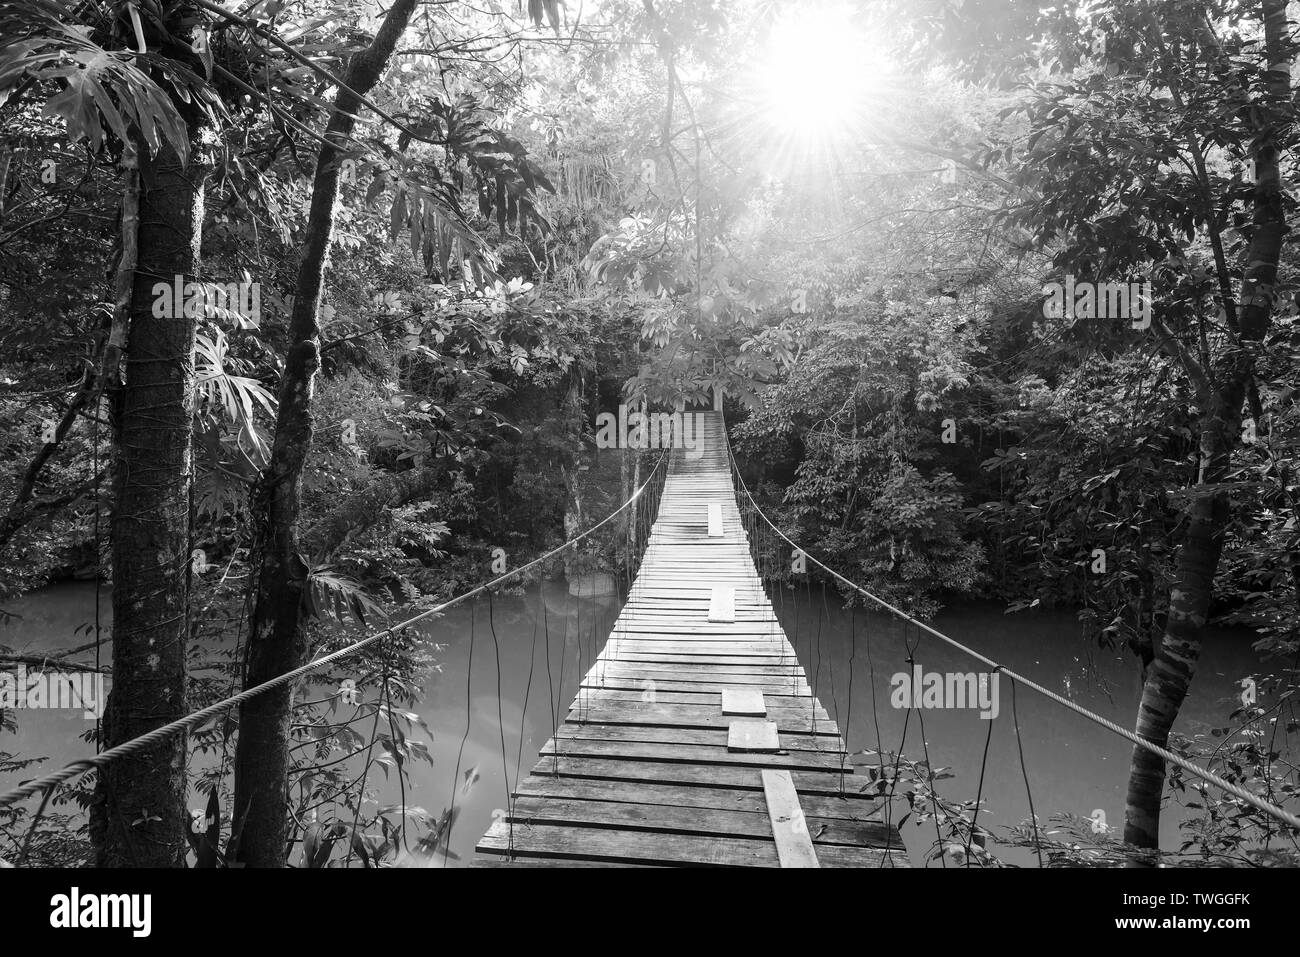 Wooden footbridge over river in tranquil forest in stunning black and white Stock Photo